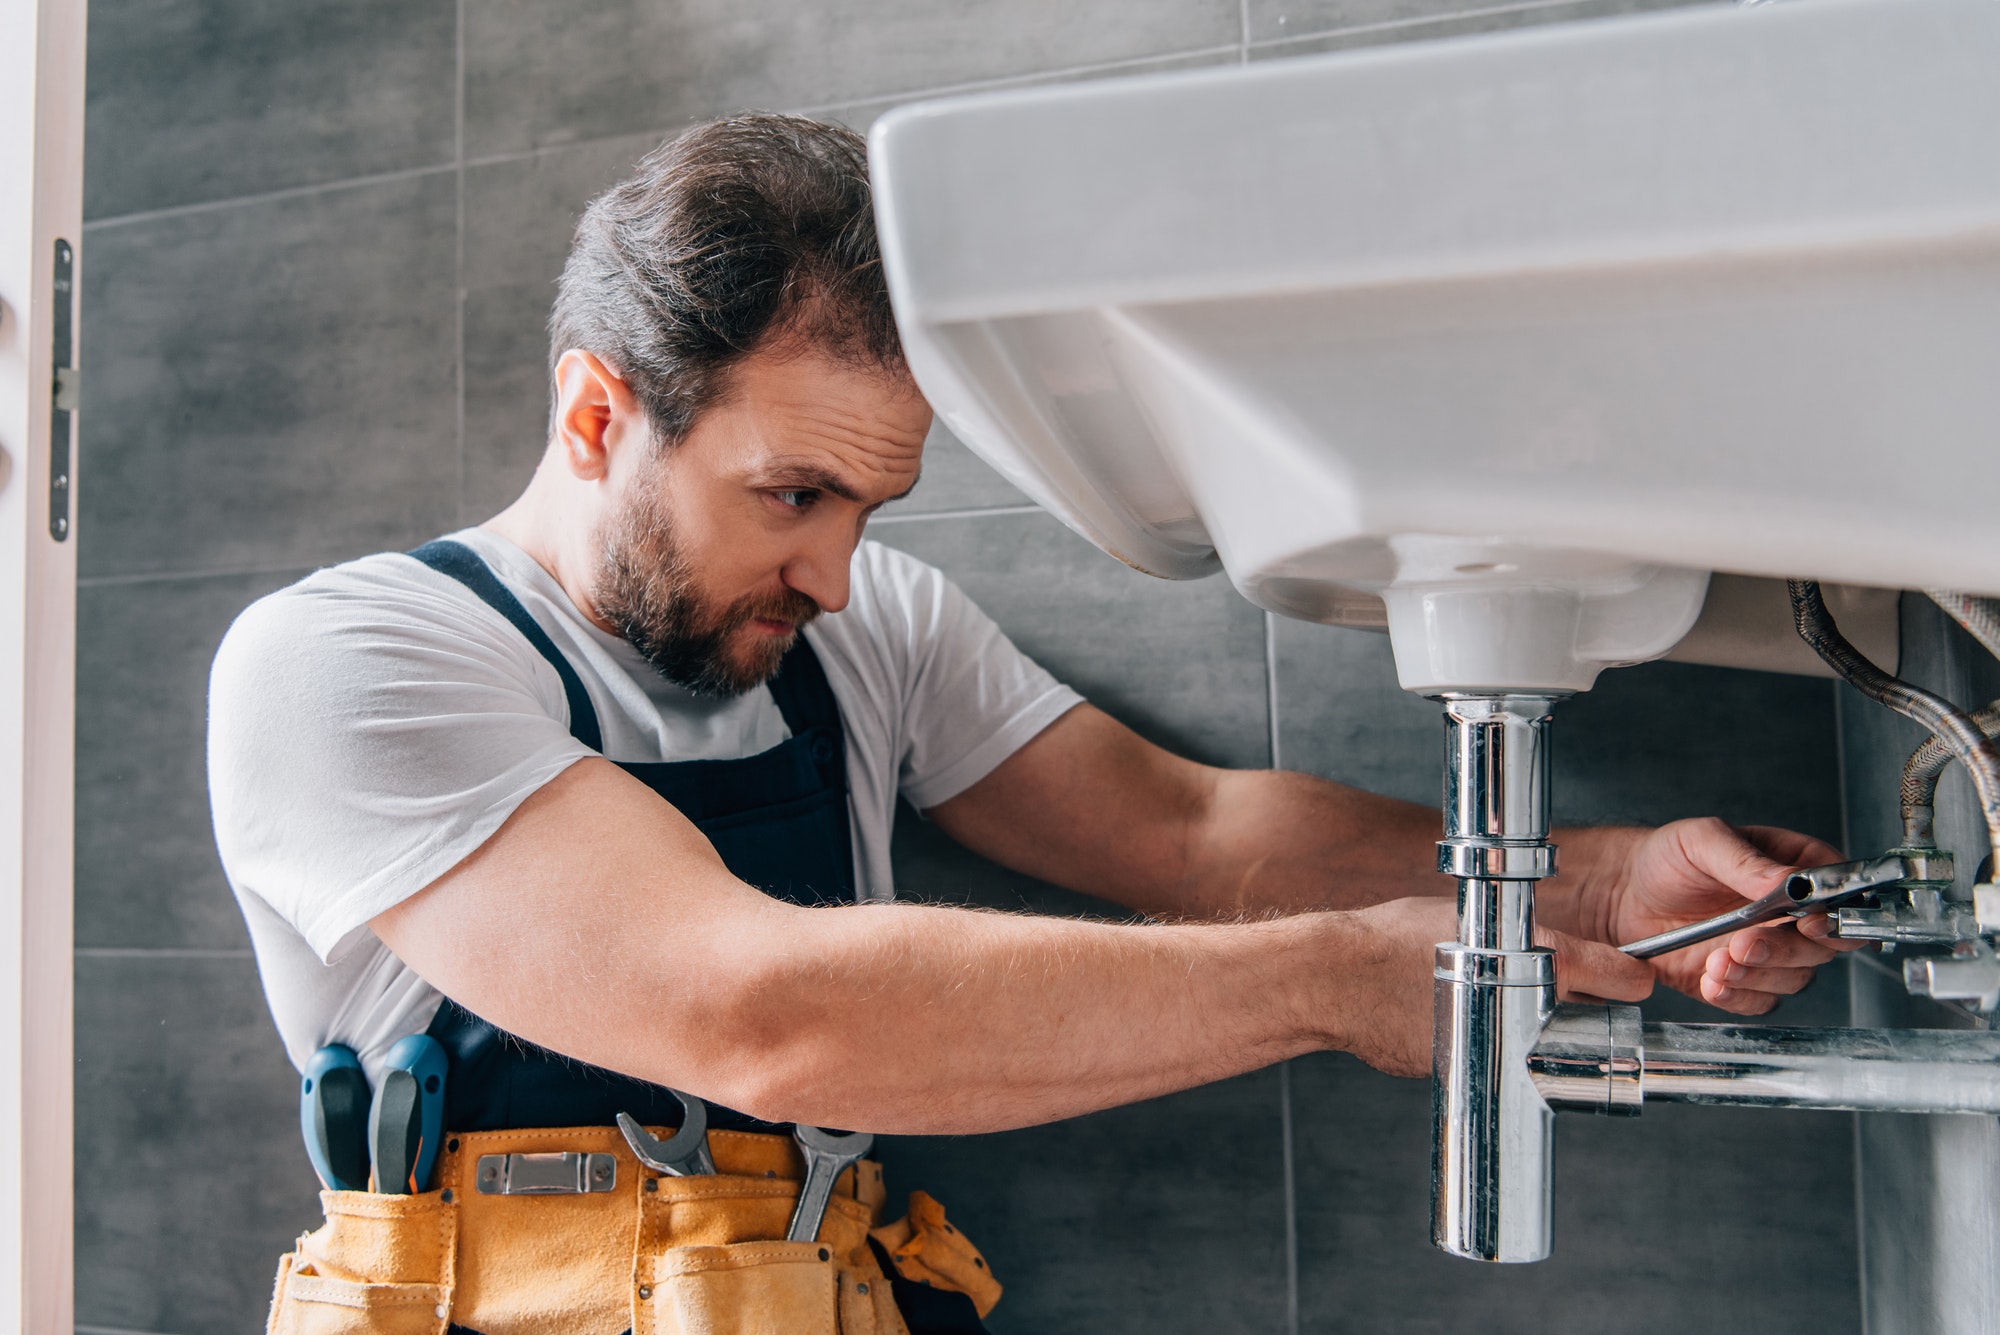 Plumbing Services in Coral Gables FL